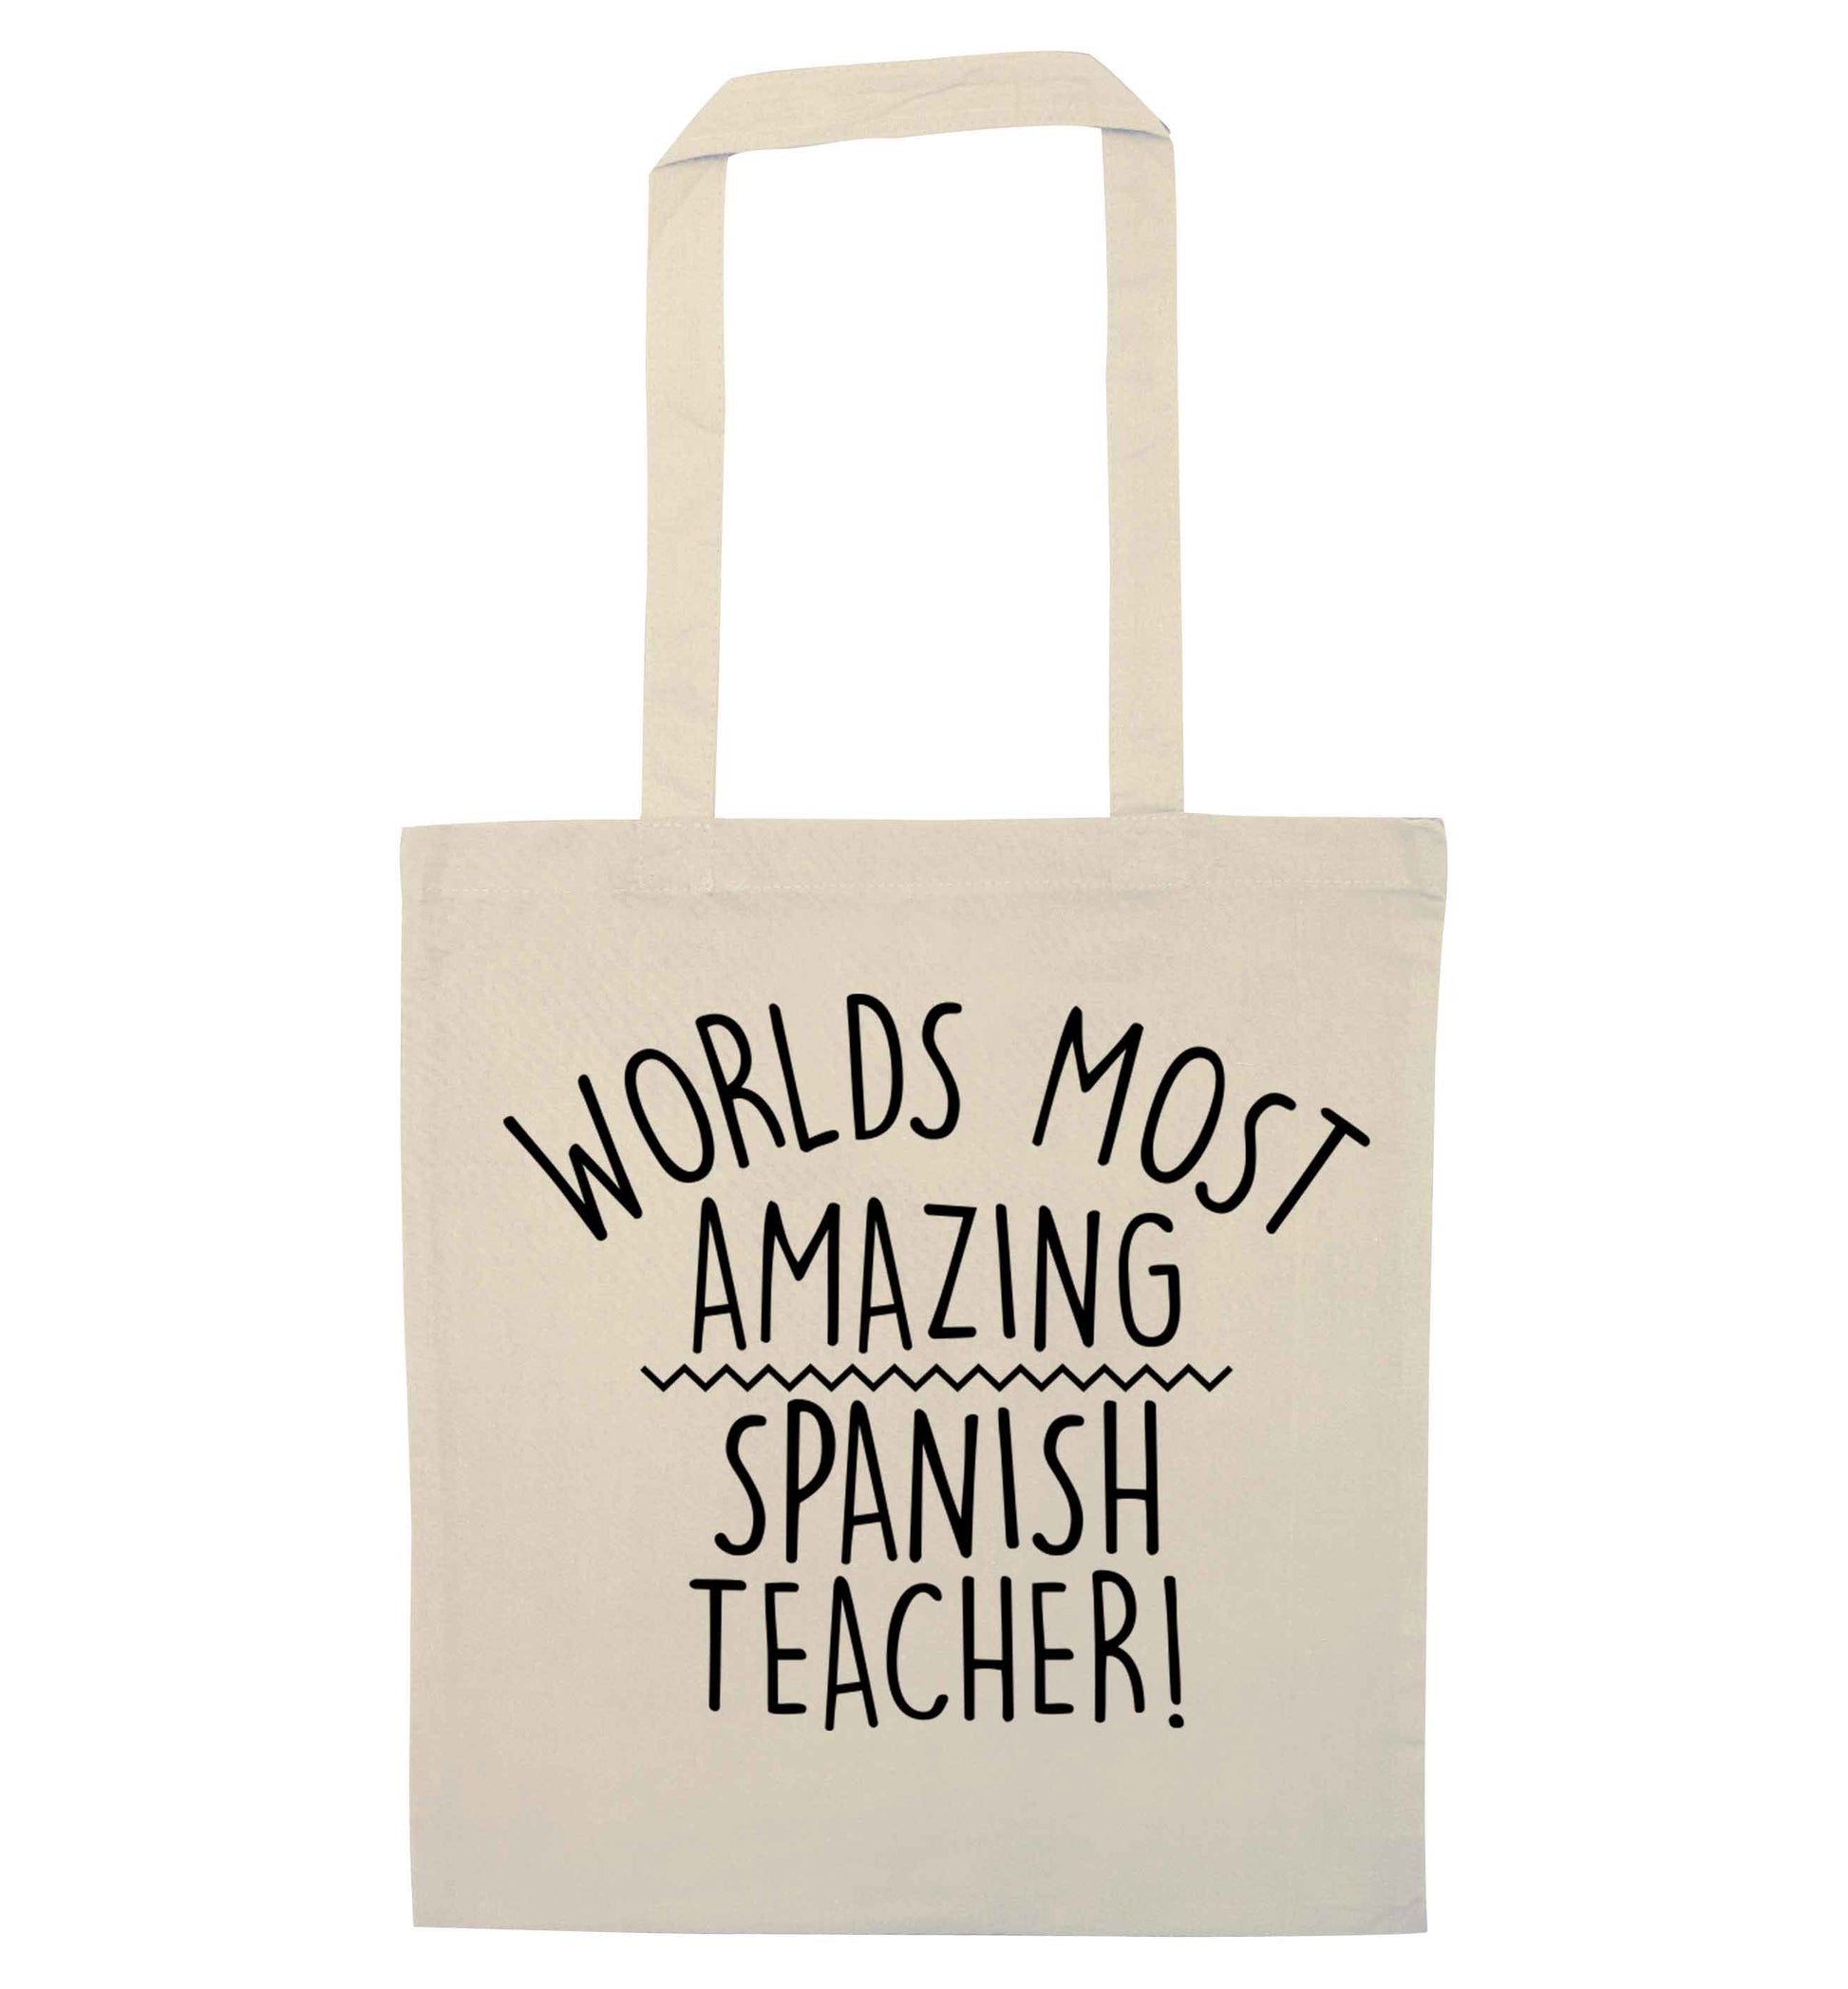 Worlds most amazing Spanish teacher natural tote bag